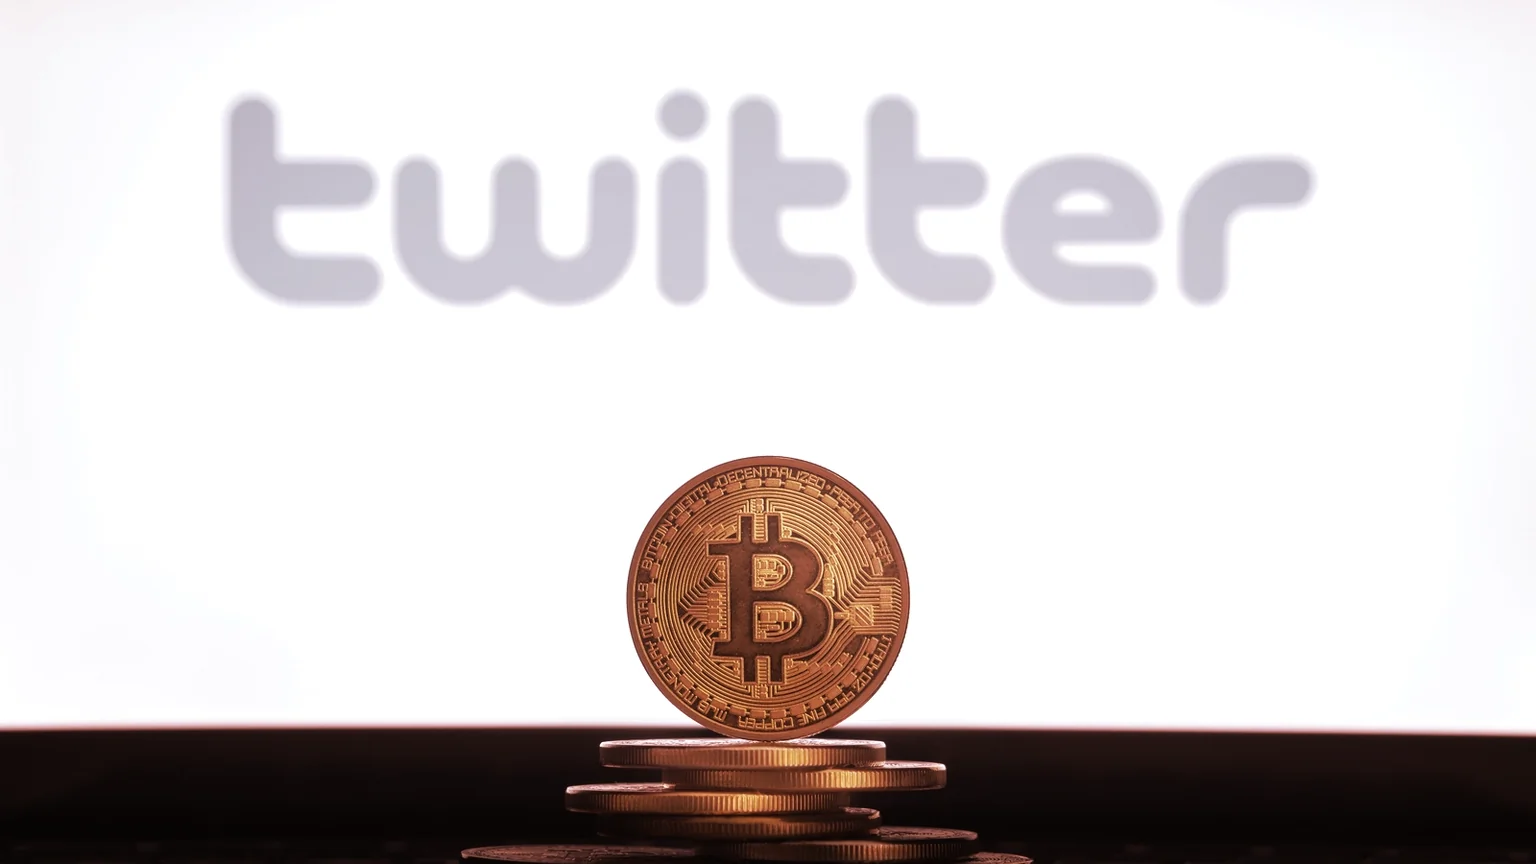 Twitter and Bitcoin. Image: Shutterstock